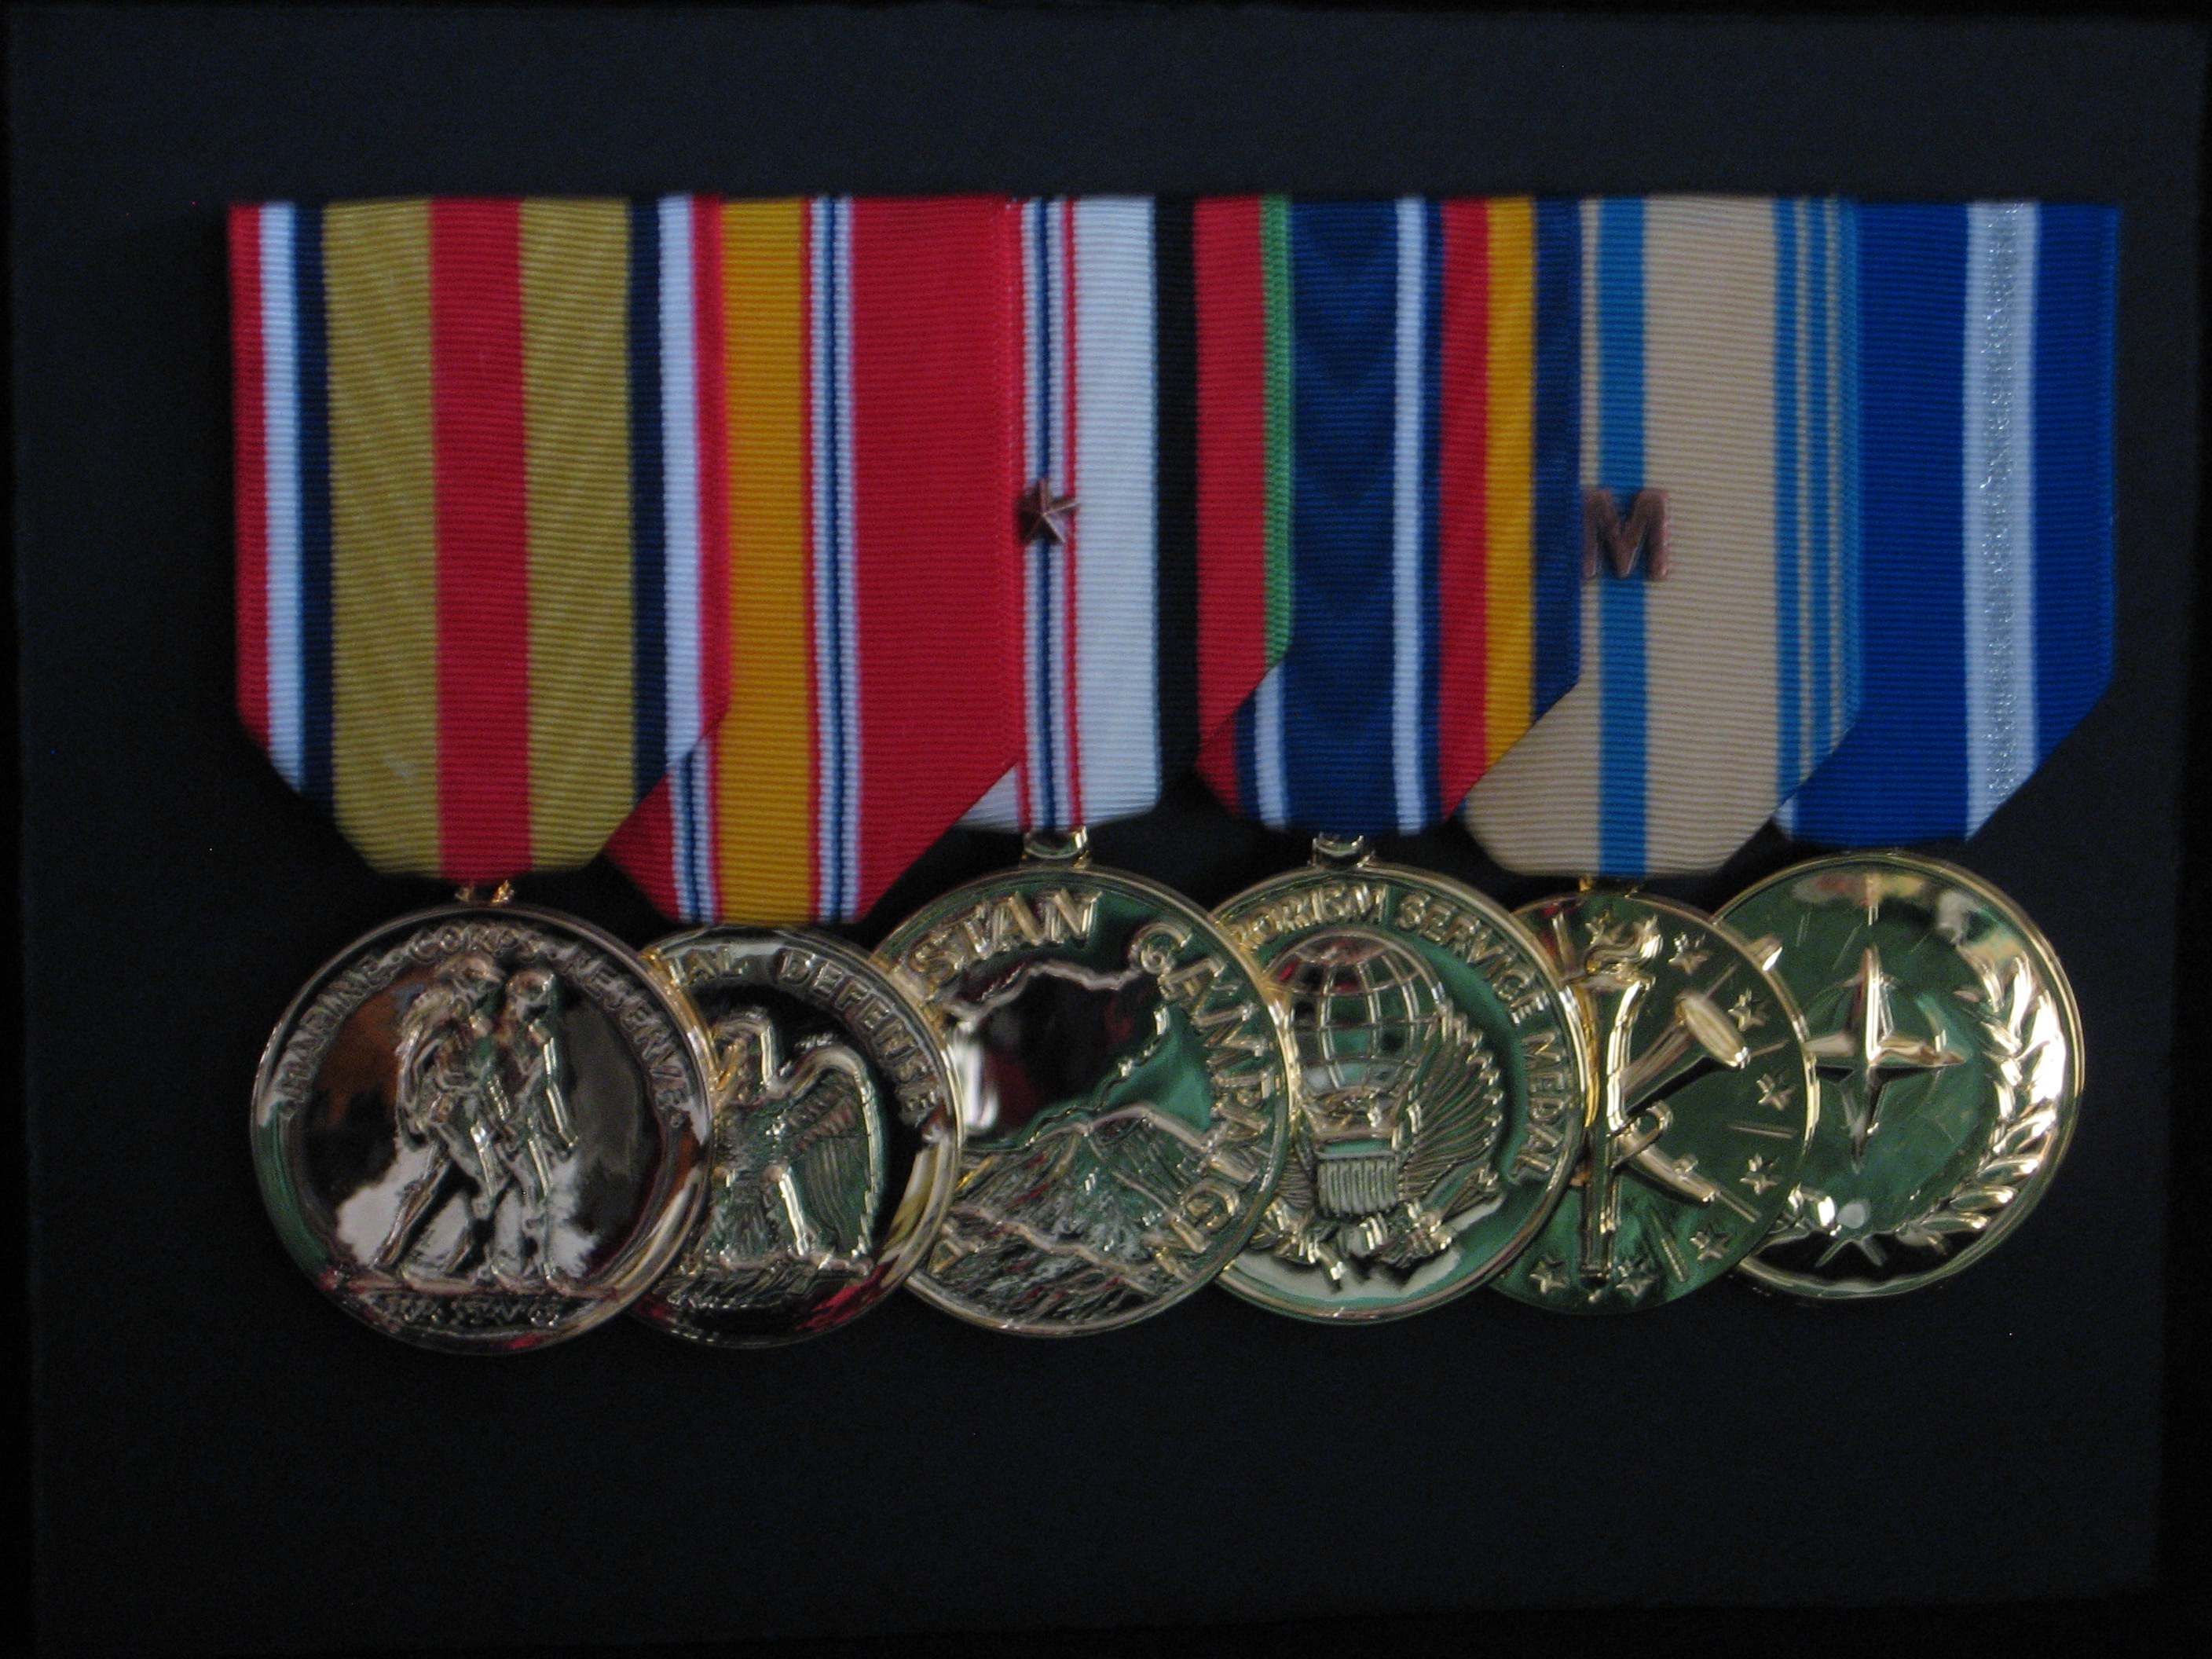 A MEDAL & RIBBON Mounting Services